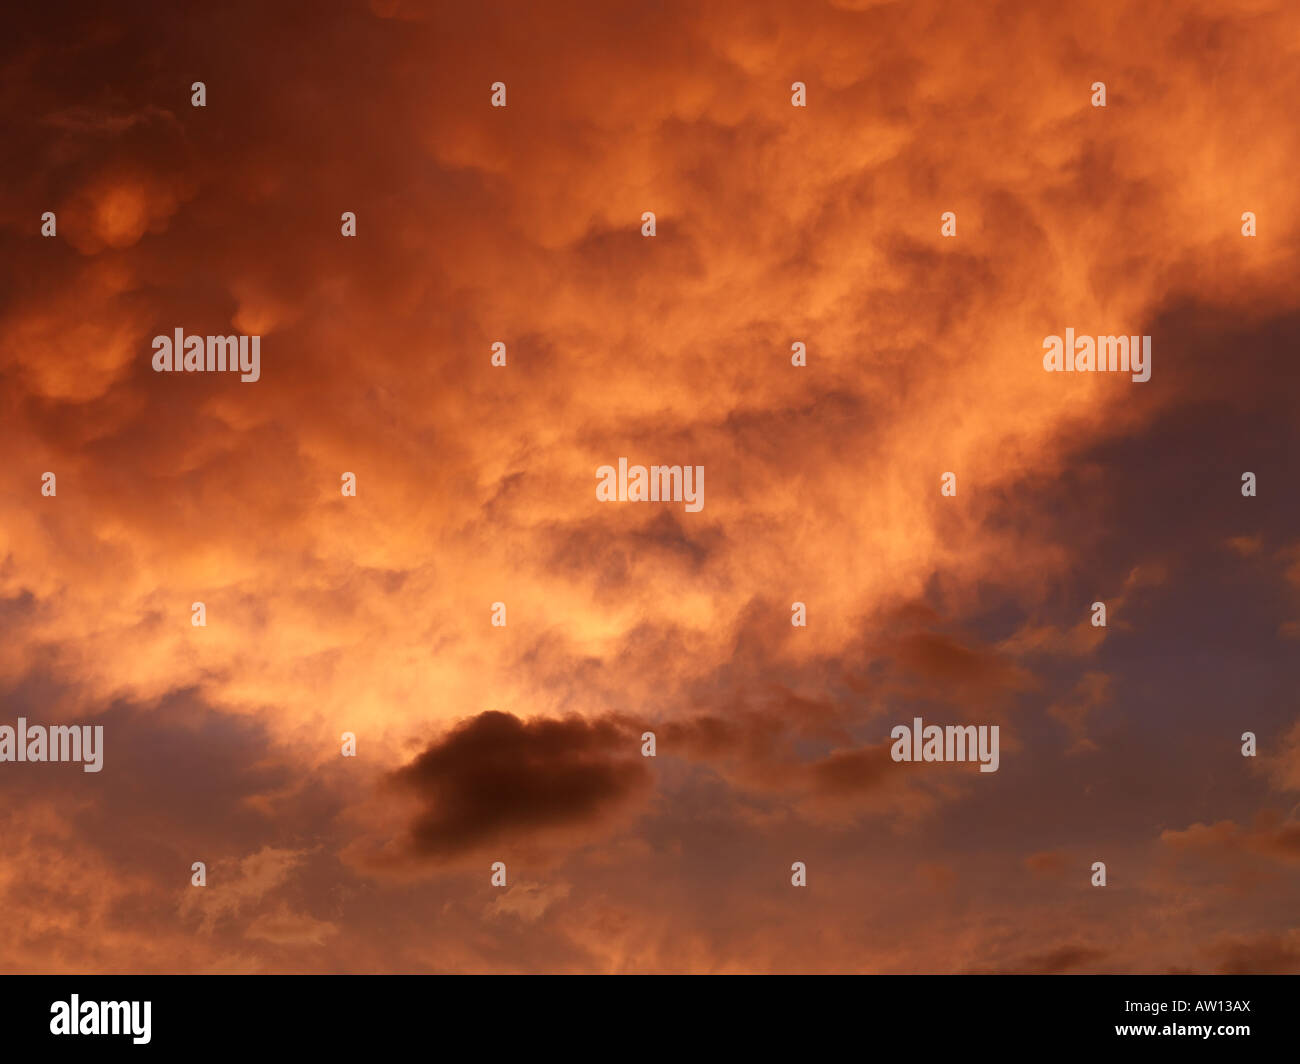 Sunset sky with orange and yellow clouds Stock Photo